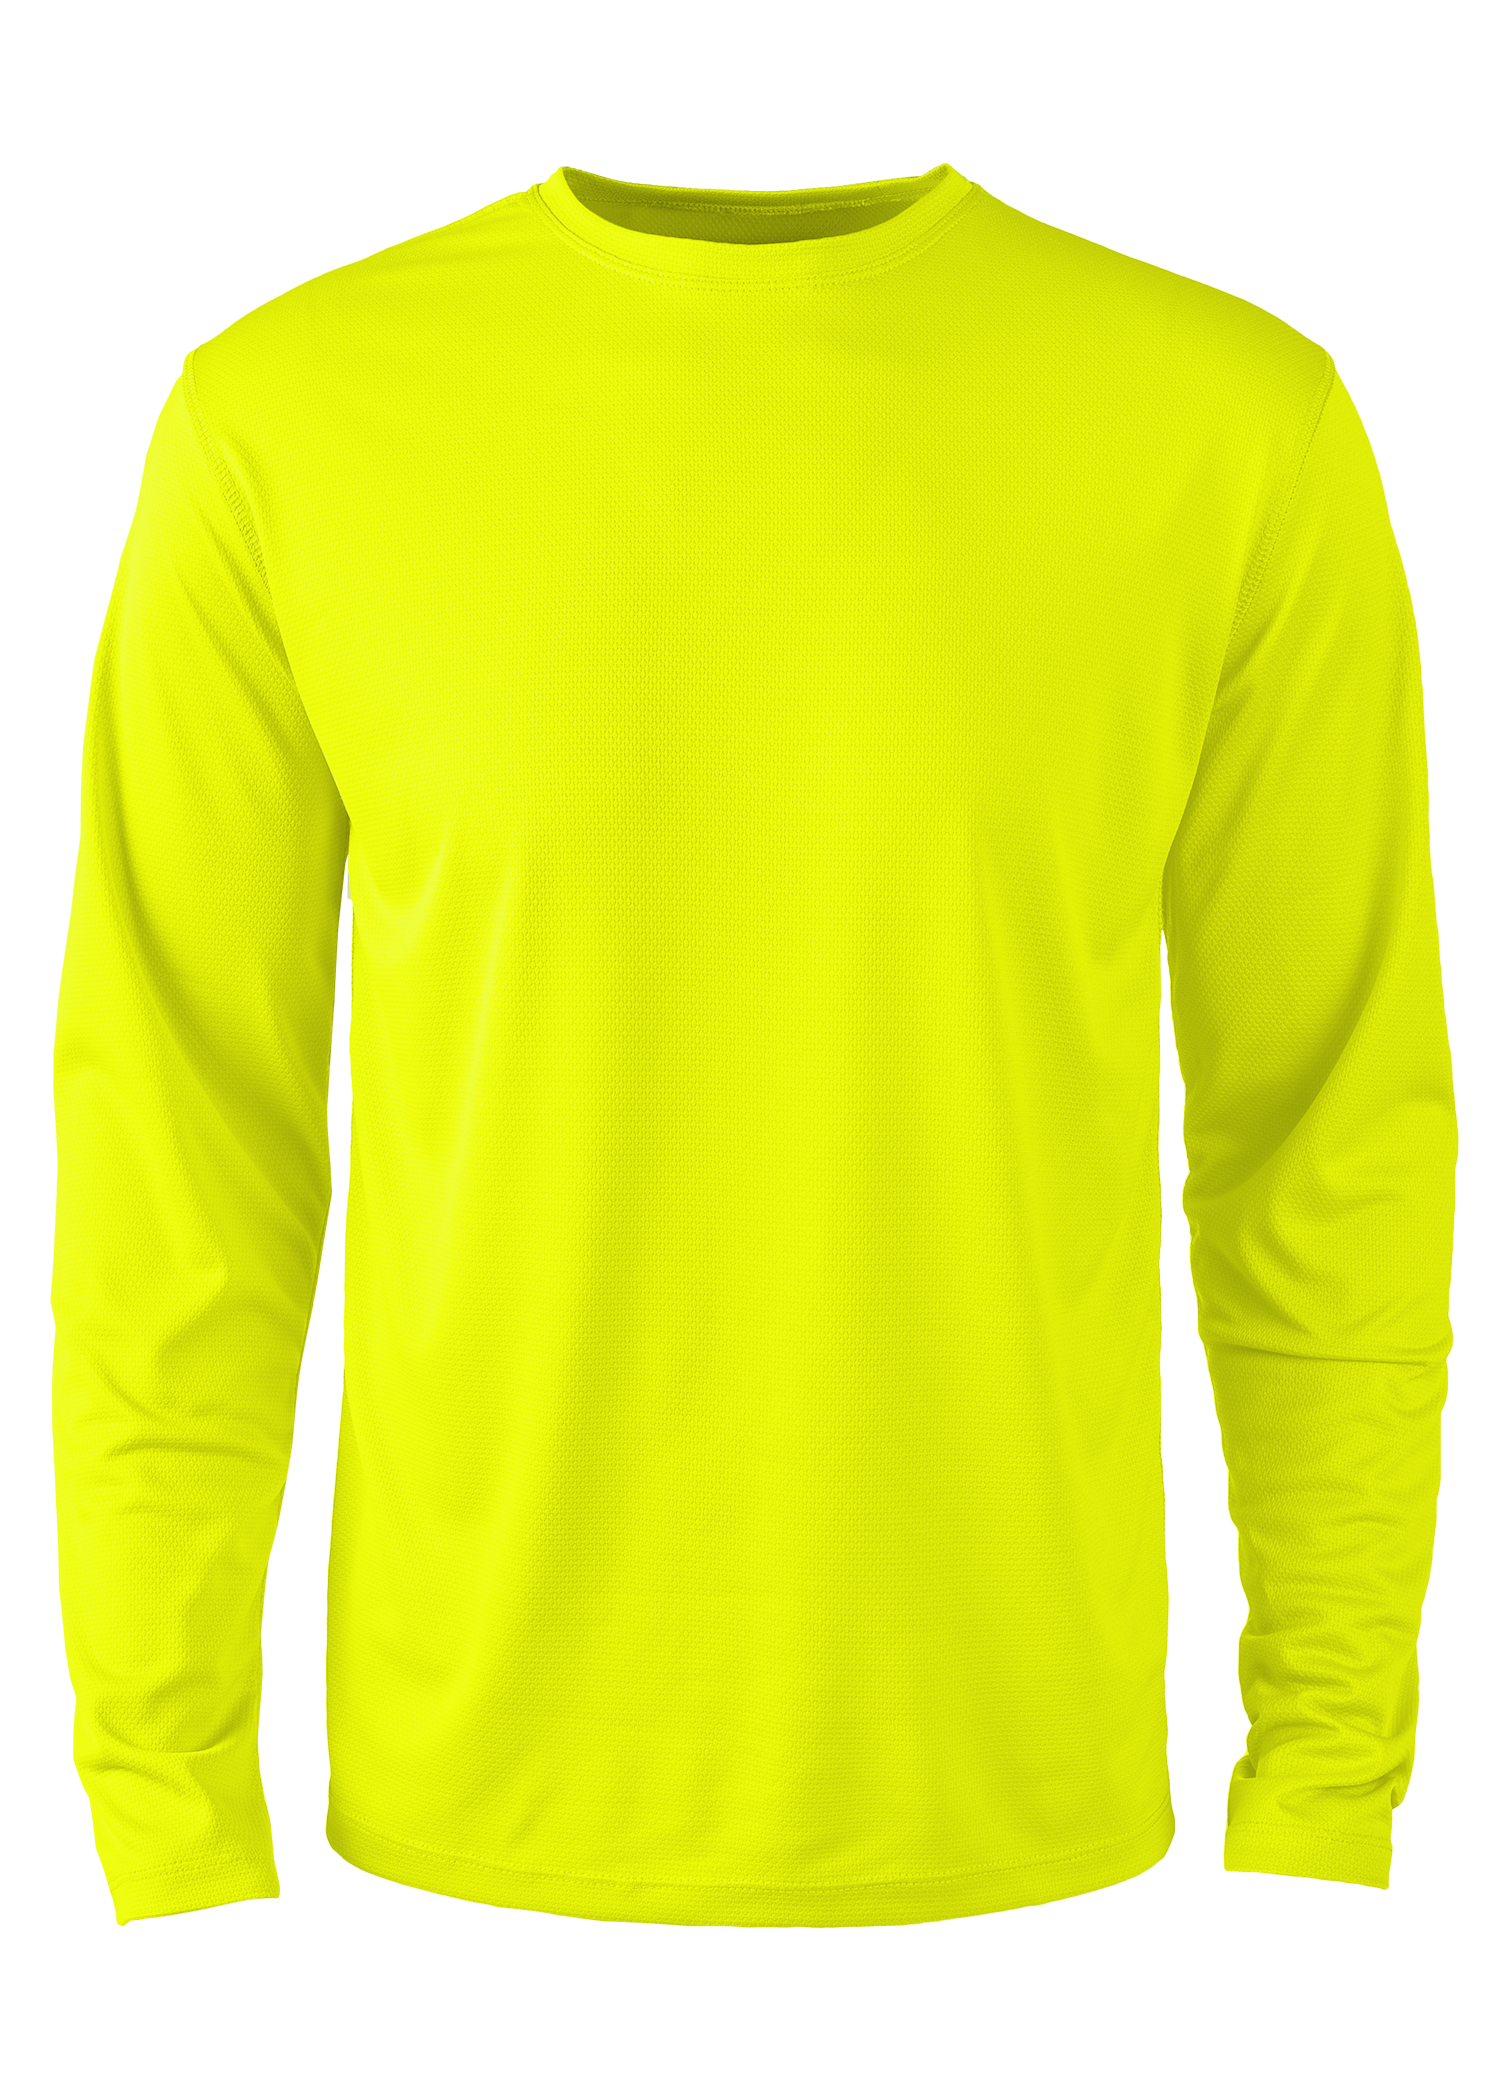 Z3502-NeonYellow-FT.png